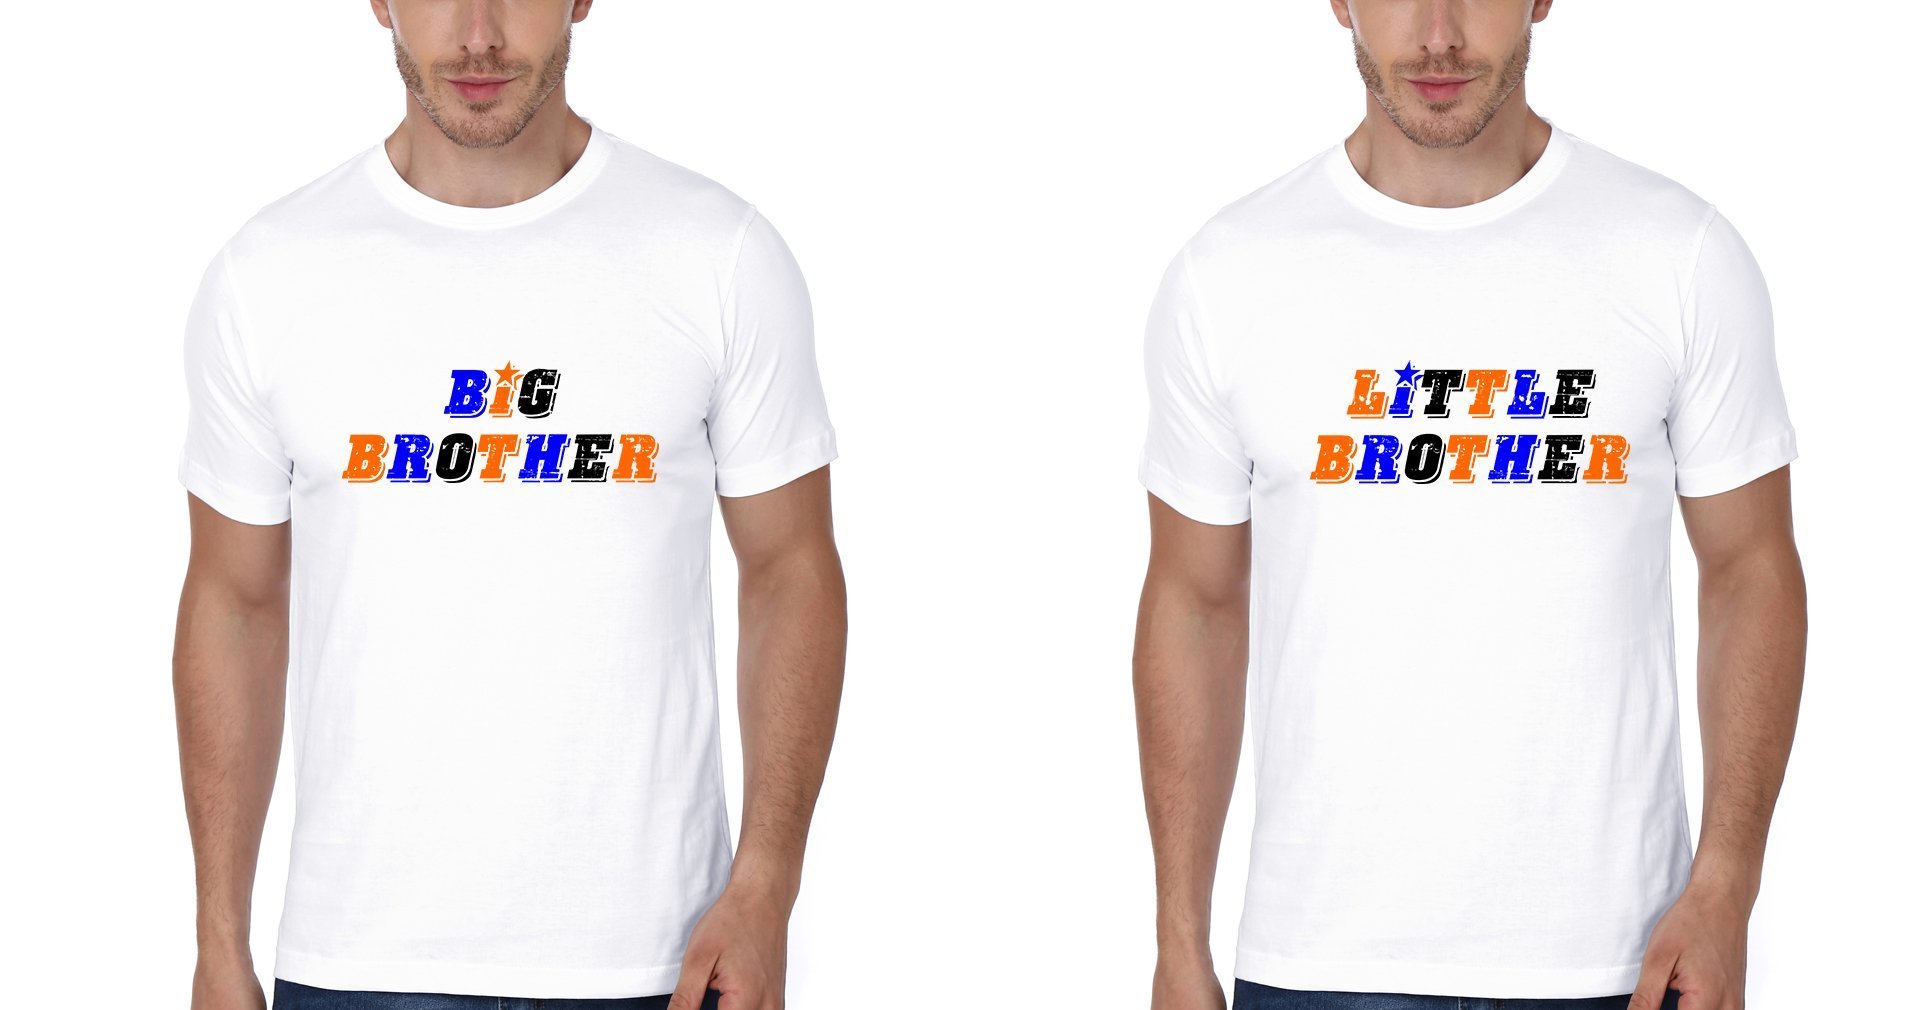 BIG LIL BRO Brother-Brother Half Sleeves T-Shirts -FunkyTradition - FunkyTradition